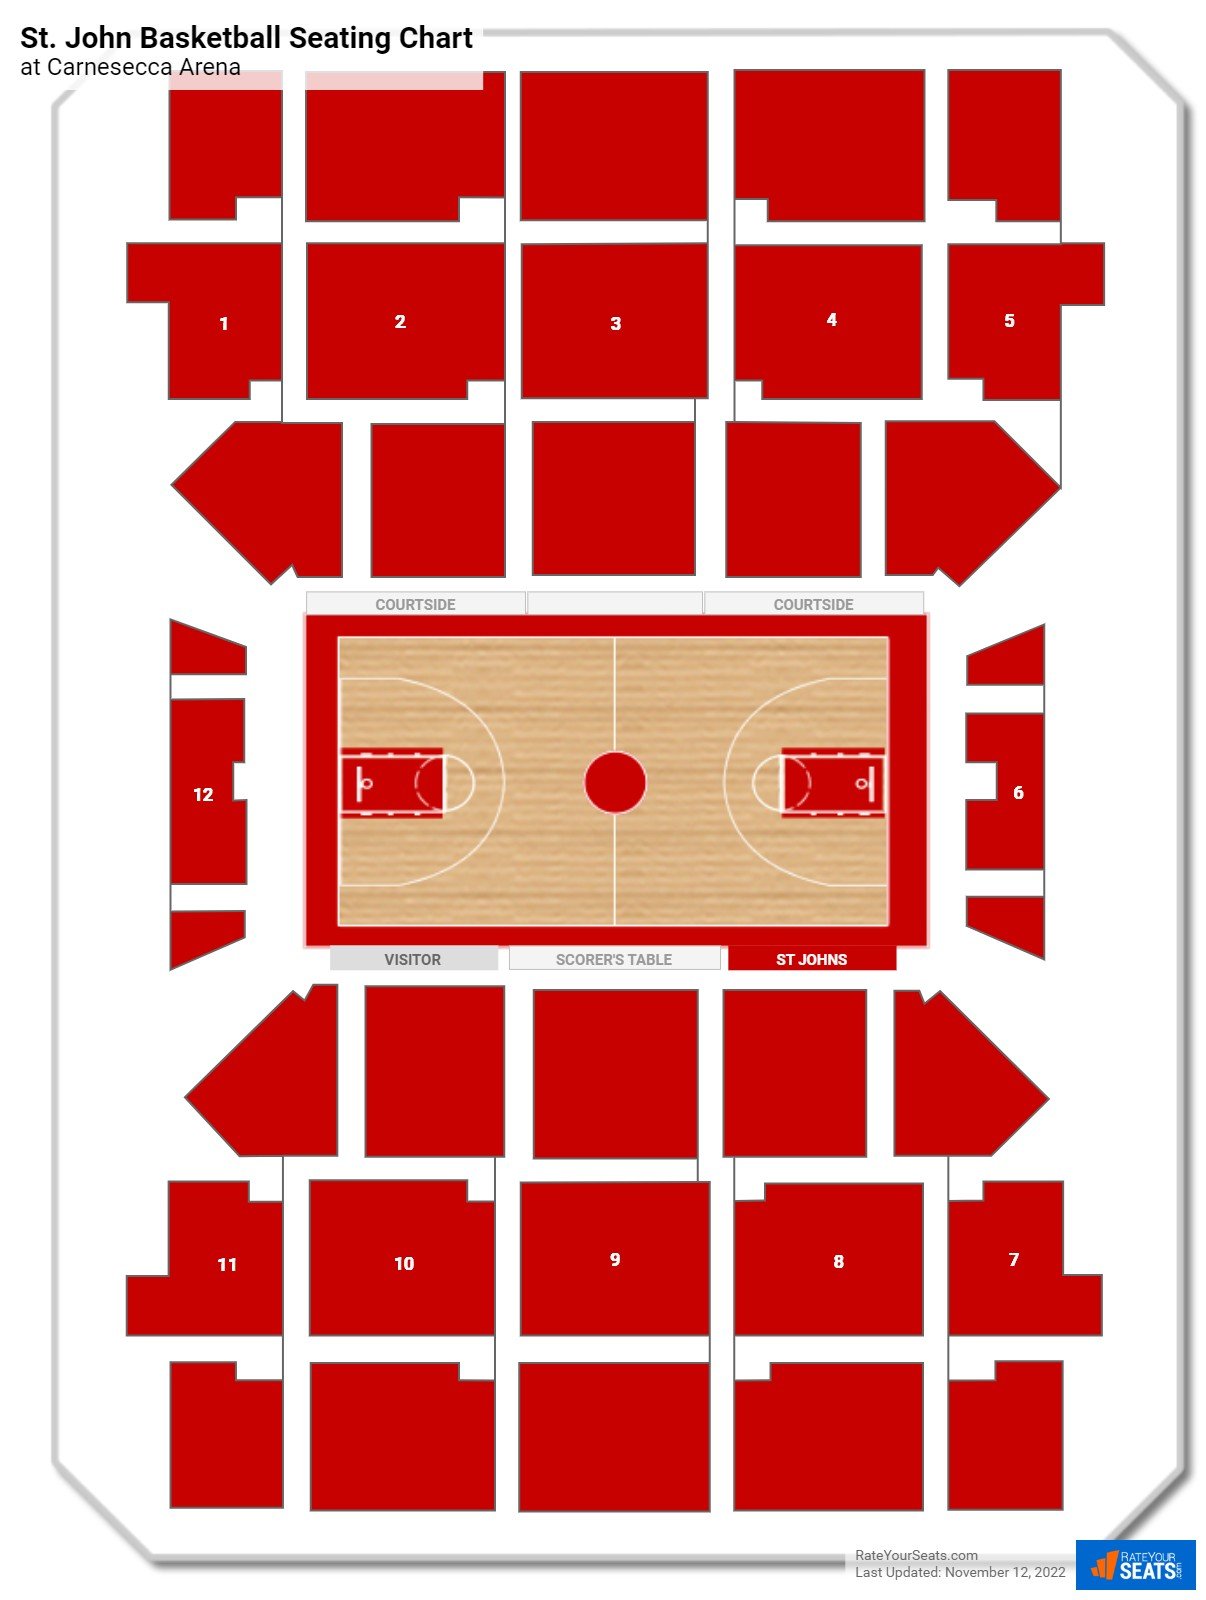 St. John Seating Chart at Carnesecca Arena